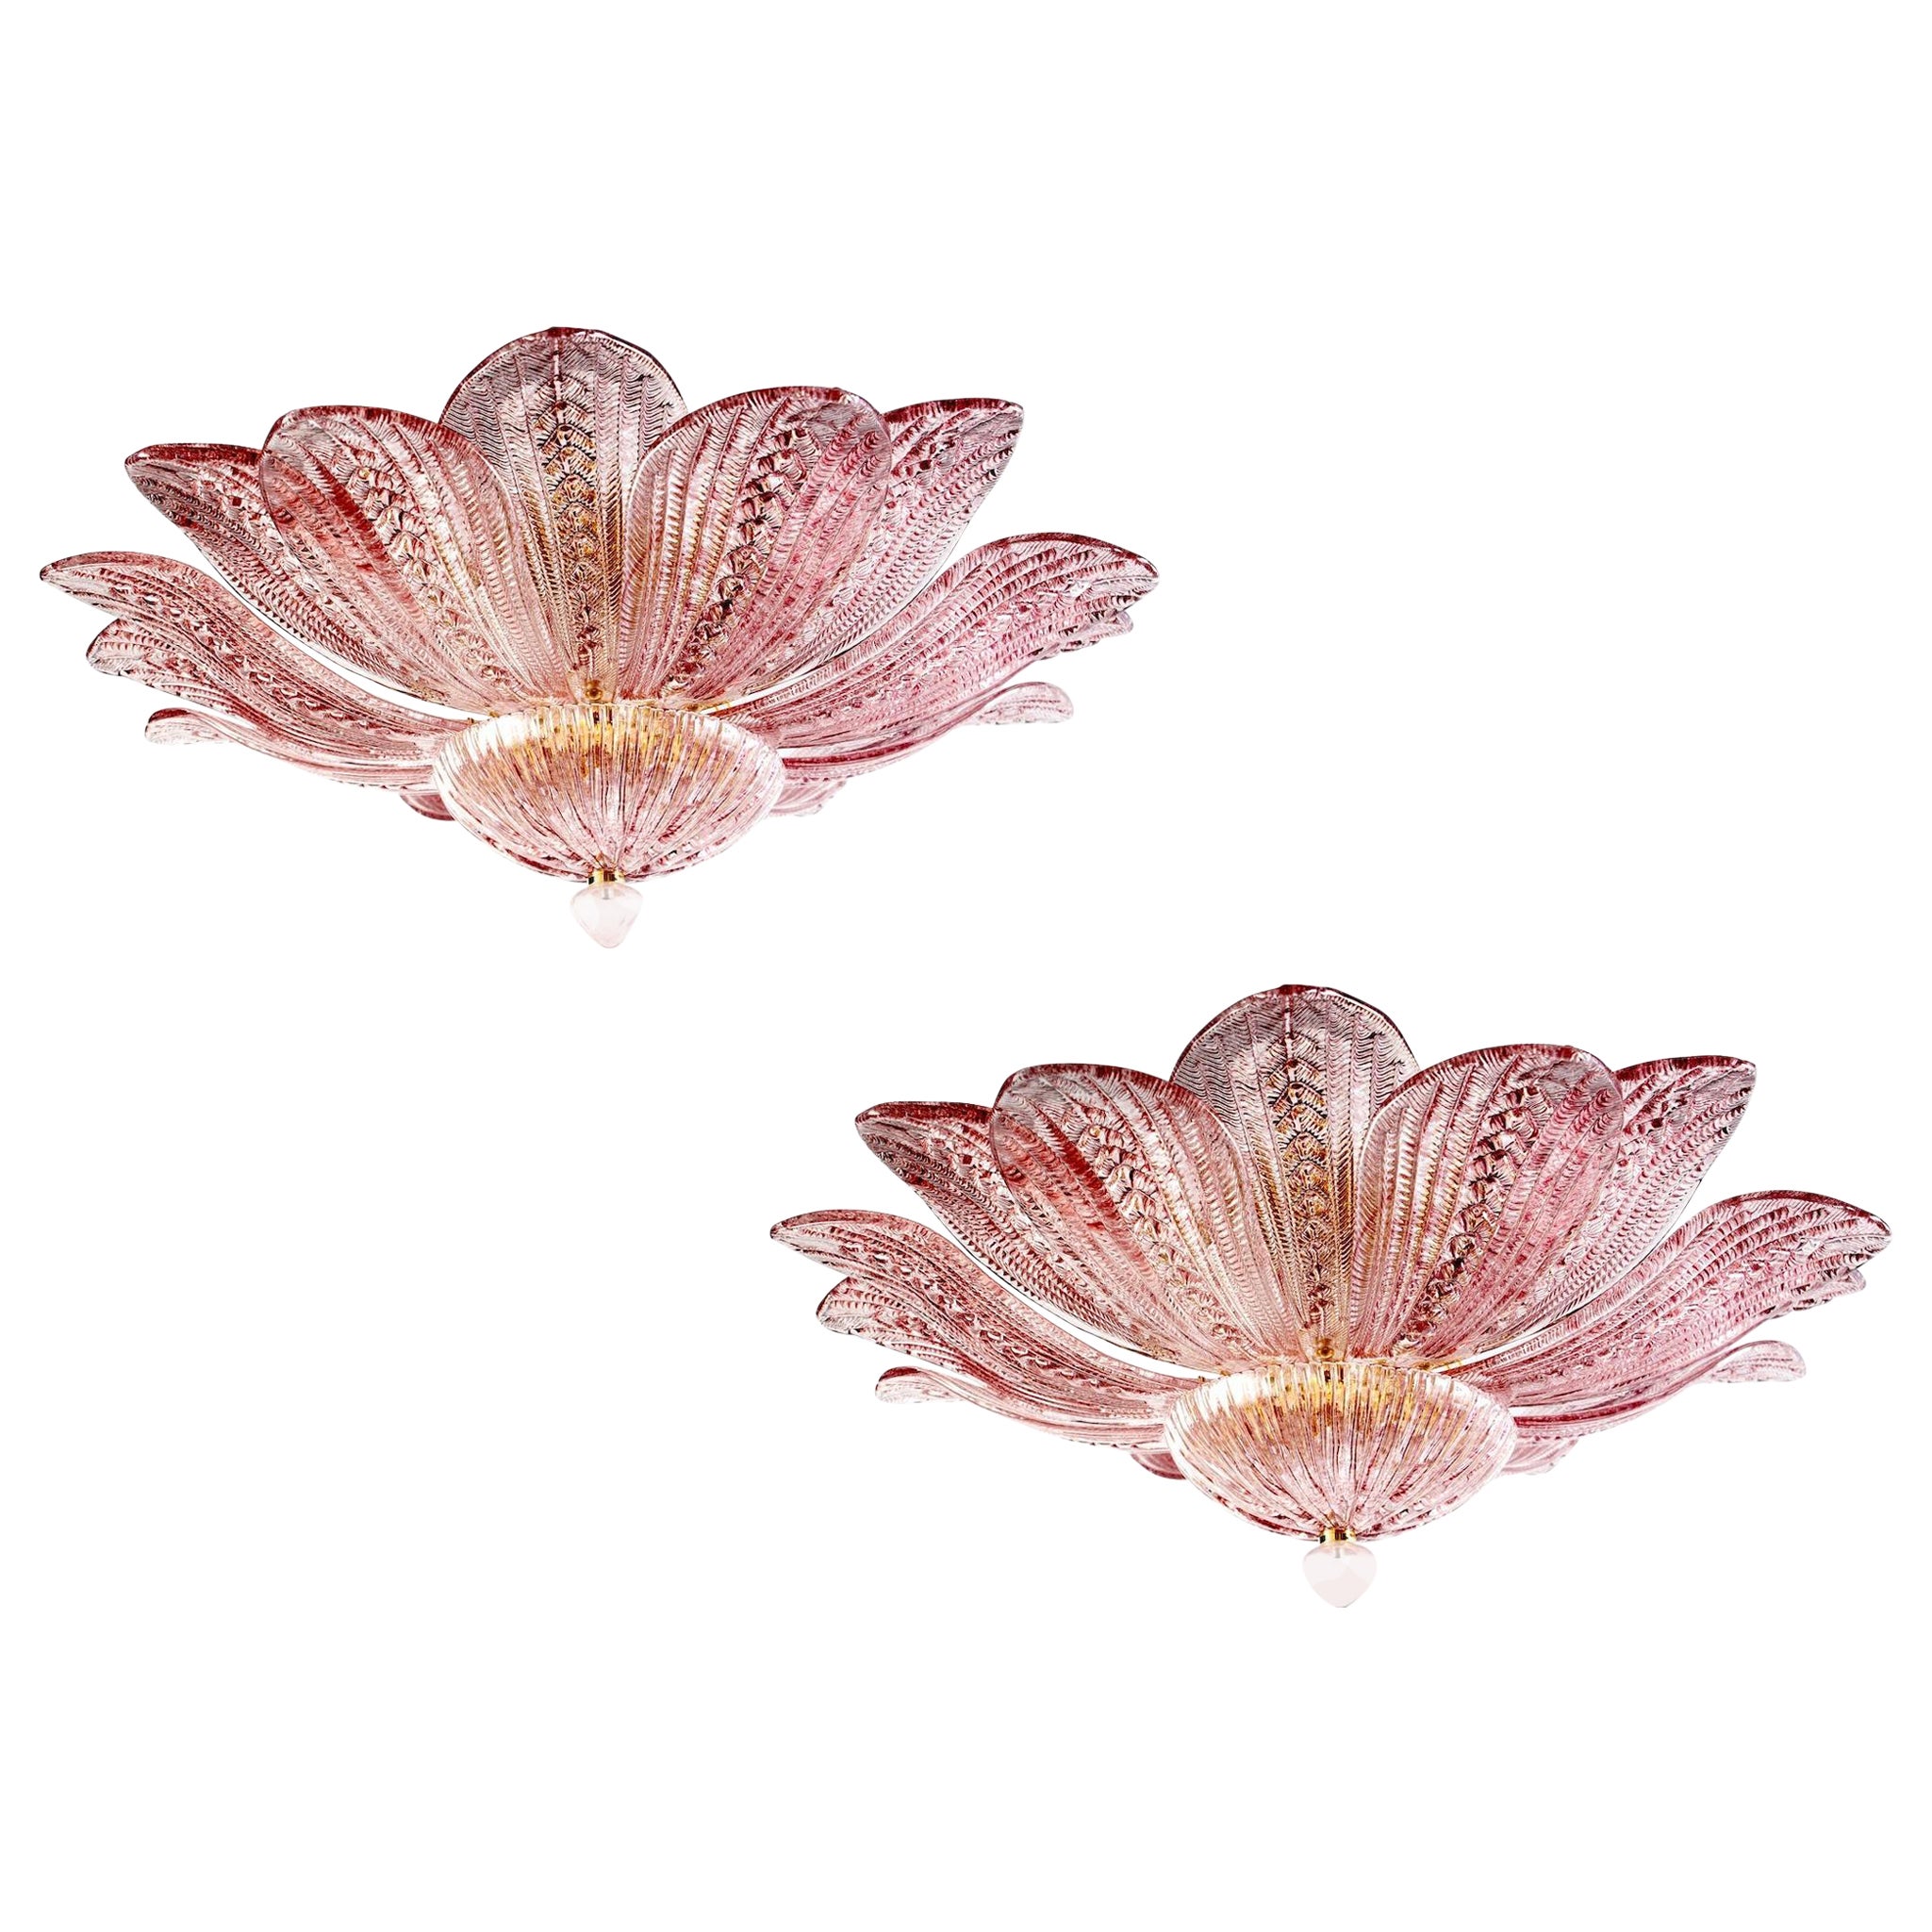 Charming Pink Amethyst Murano Glass Leave Ceiling Light or Chandelier 4